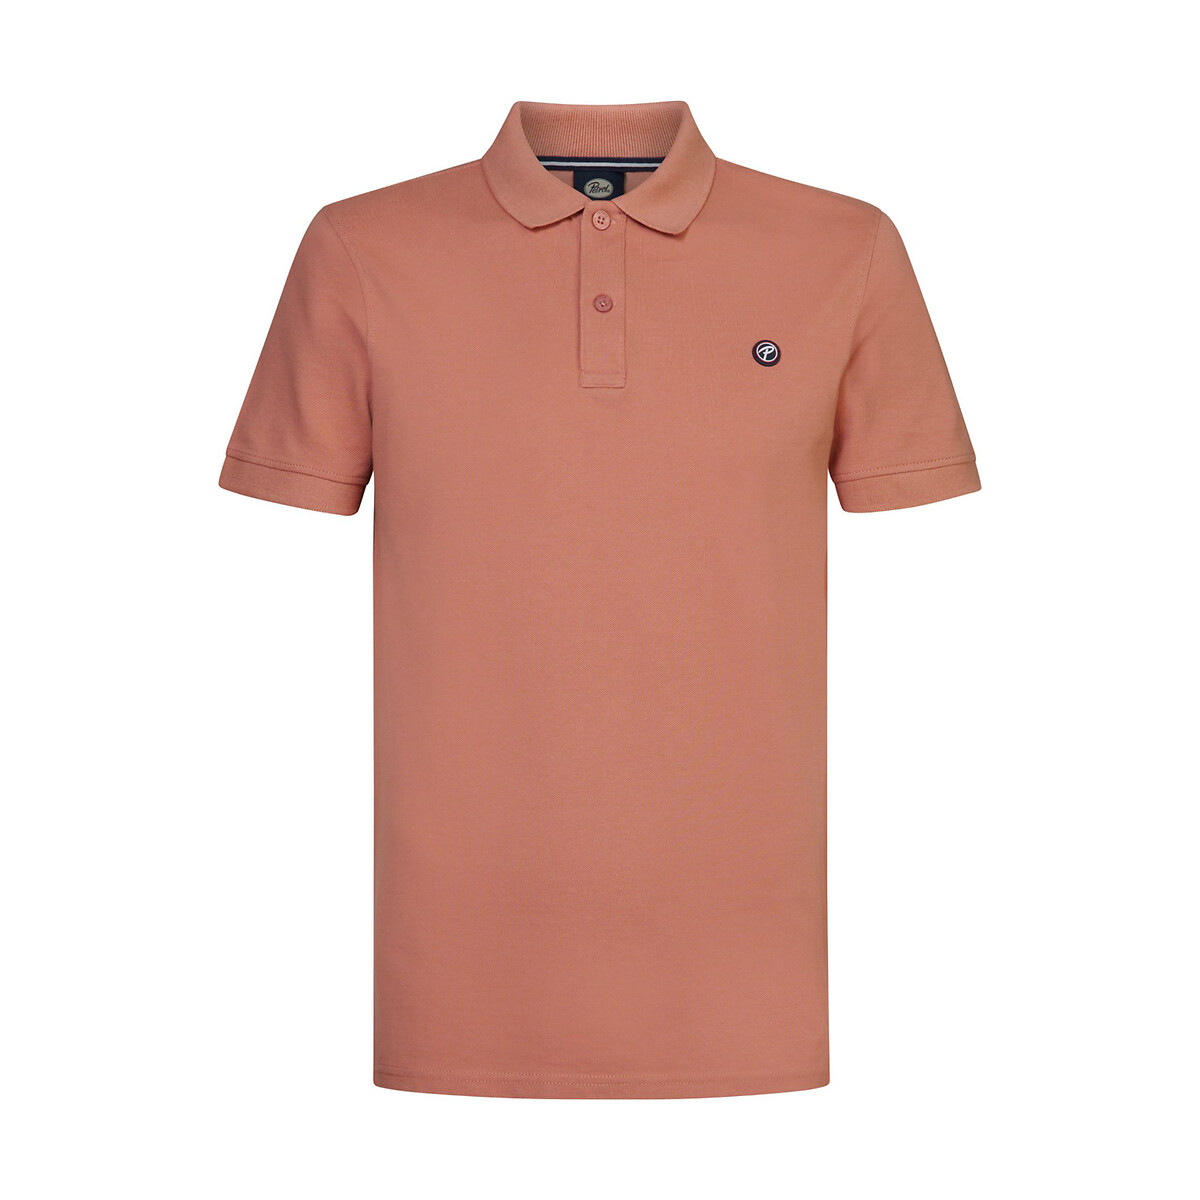 embroidered logo polo shirt in cotton with short sleeves